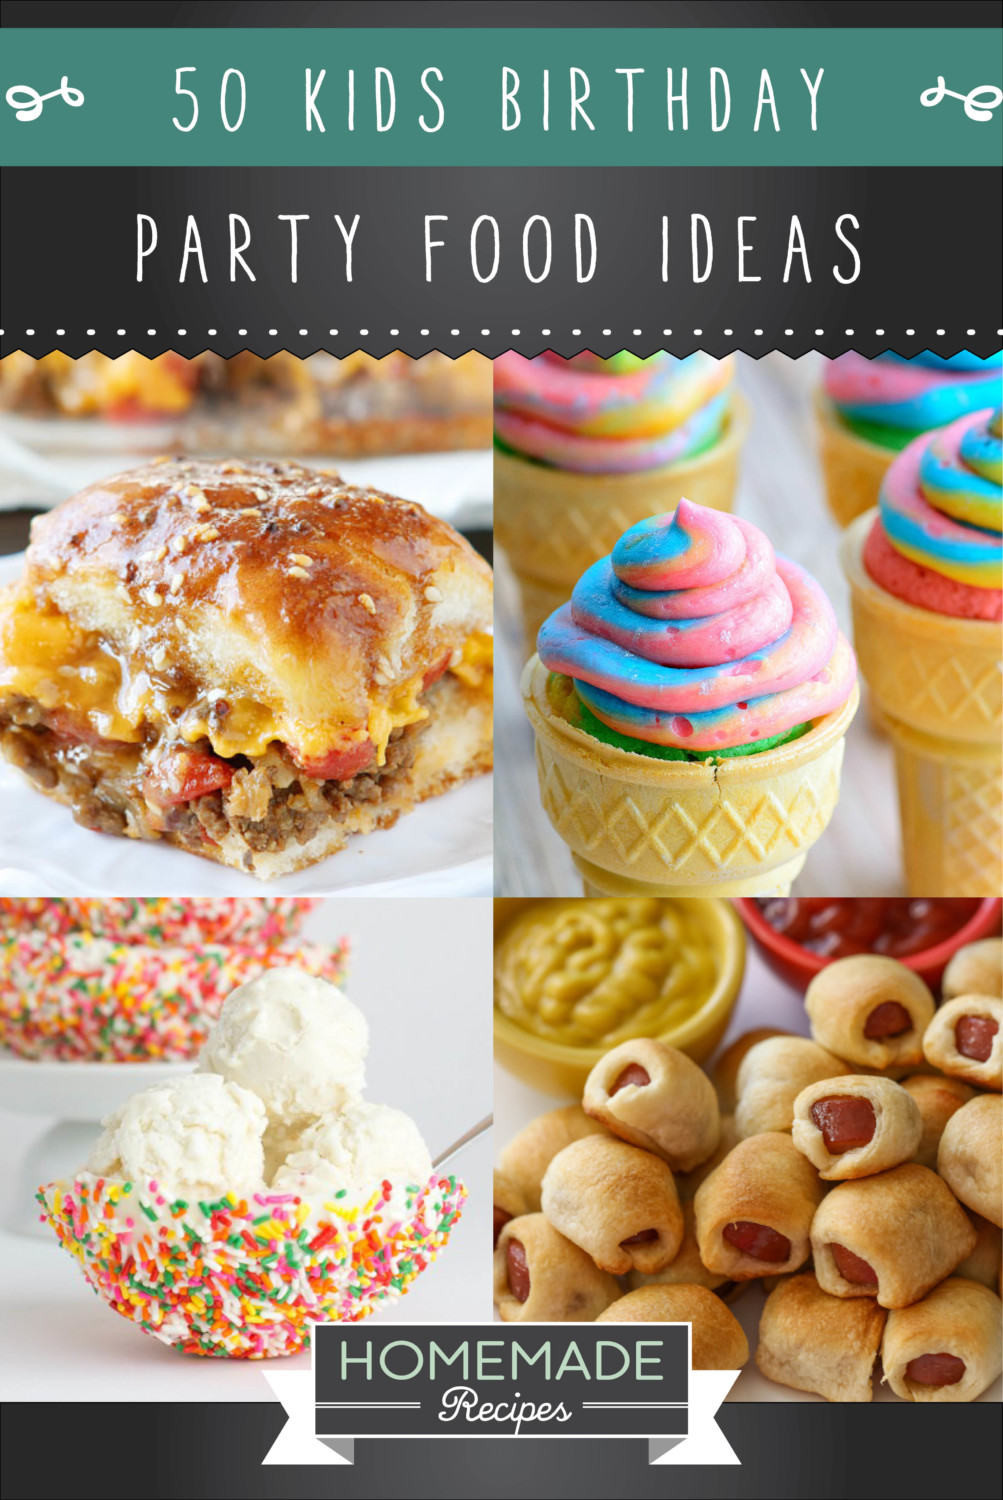 Birthday Party Meal Ideas
 50 Kids Birthday Party Food Ideas